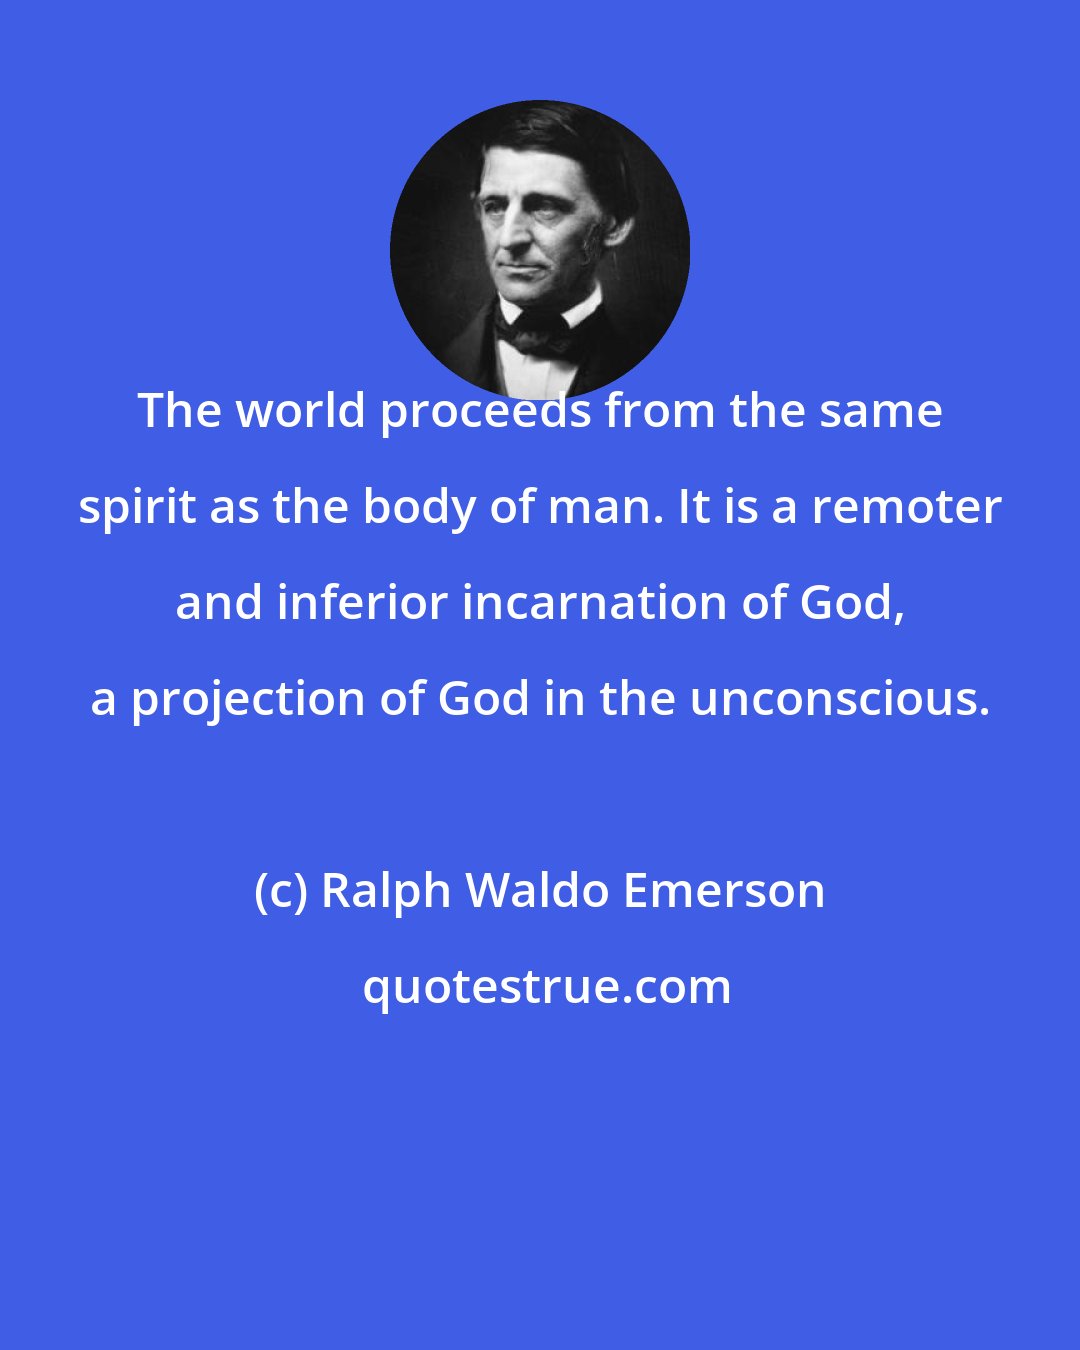 Ralph Waldo Emerson: The world proceeds from the same spirit as the body of man. It is a remoter and inferior incarnation of God, a projection of God in the unconscious.